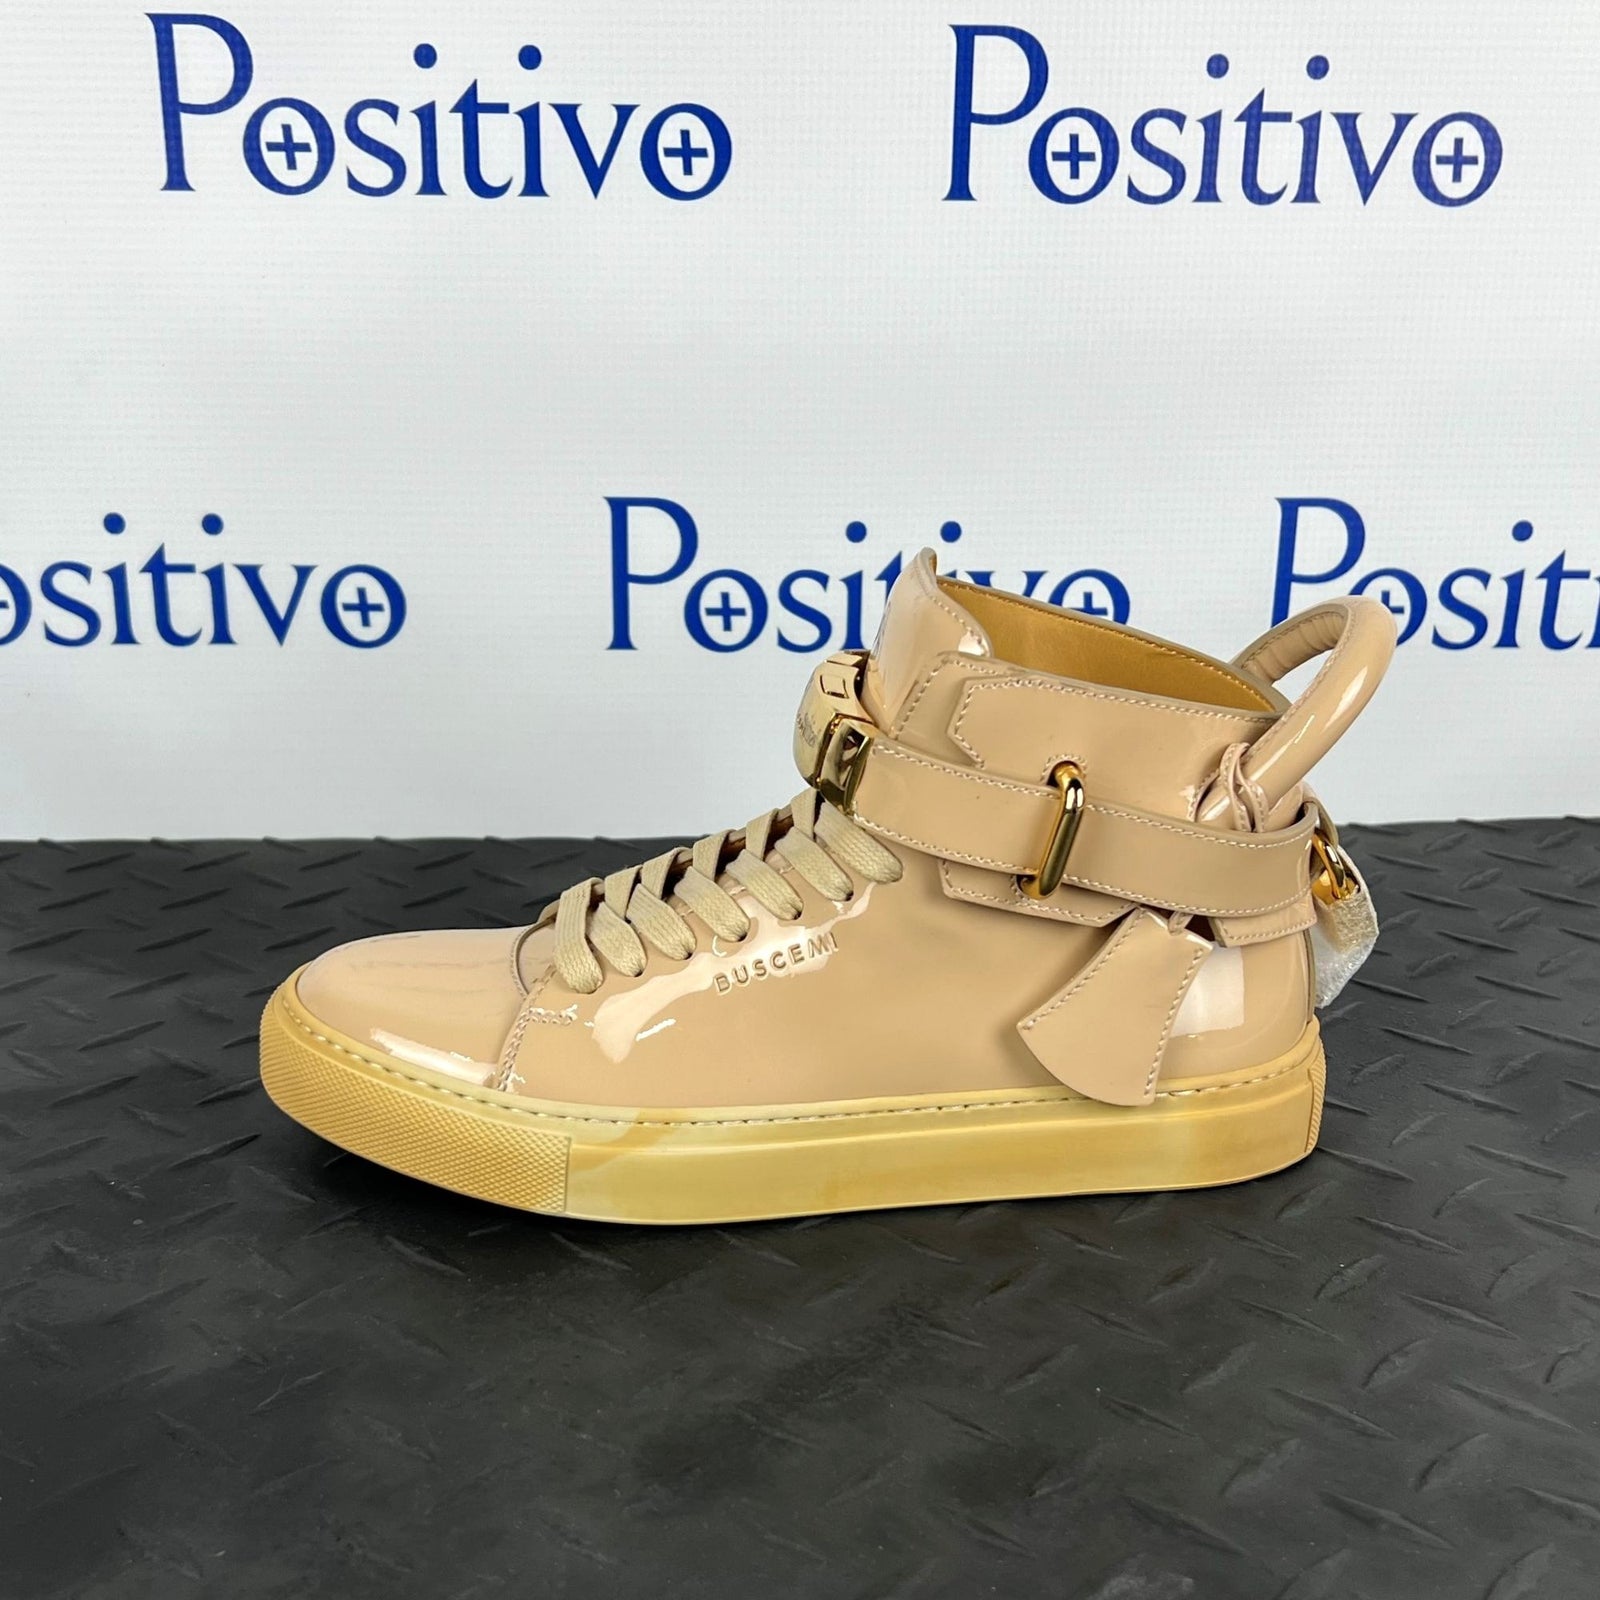 BUSCEMI x The Selby 100mm Sneaker